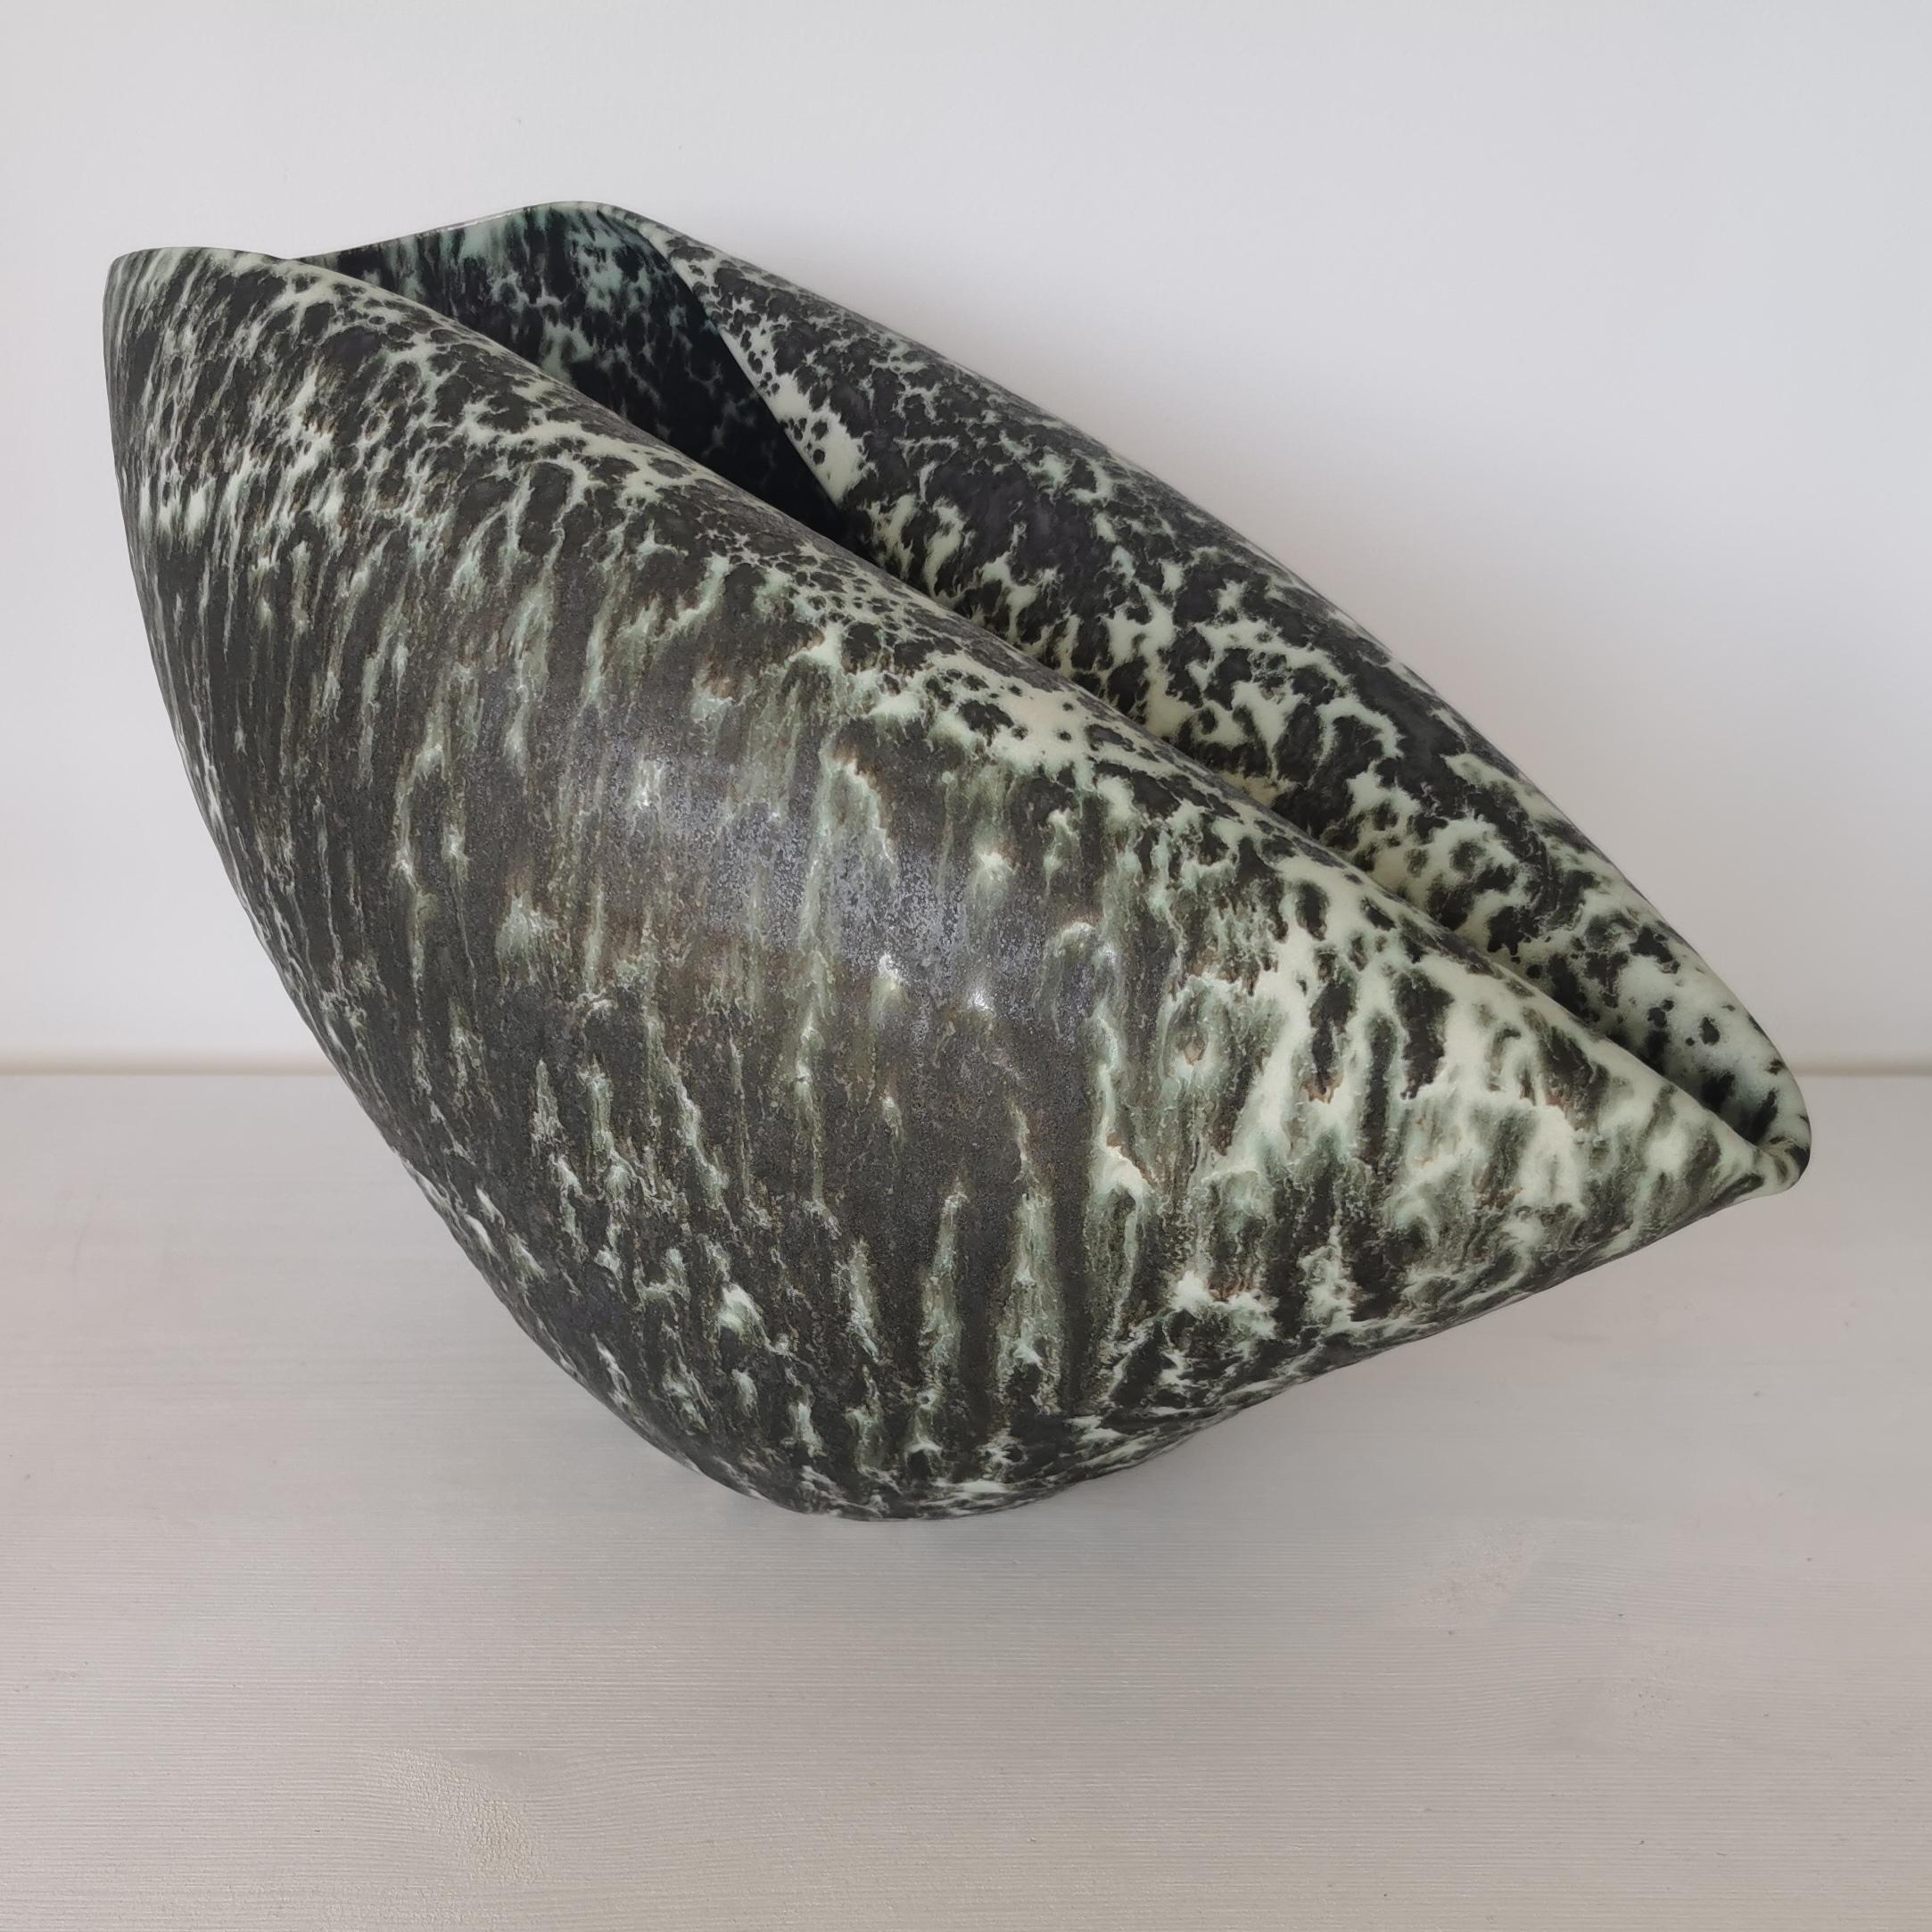 Vessel from ceramic artist Nicholas Arroyave-Portela.

No. 98 Medium long Oval form with a green and black speckled glaze (Vessel, Interior sculpture, not suitable for holding water)

White St.Thomas clay, Stoneware glazes, multi fired to cone 6